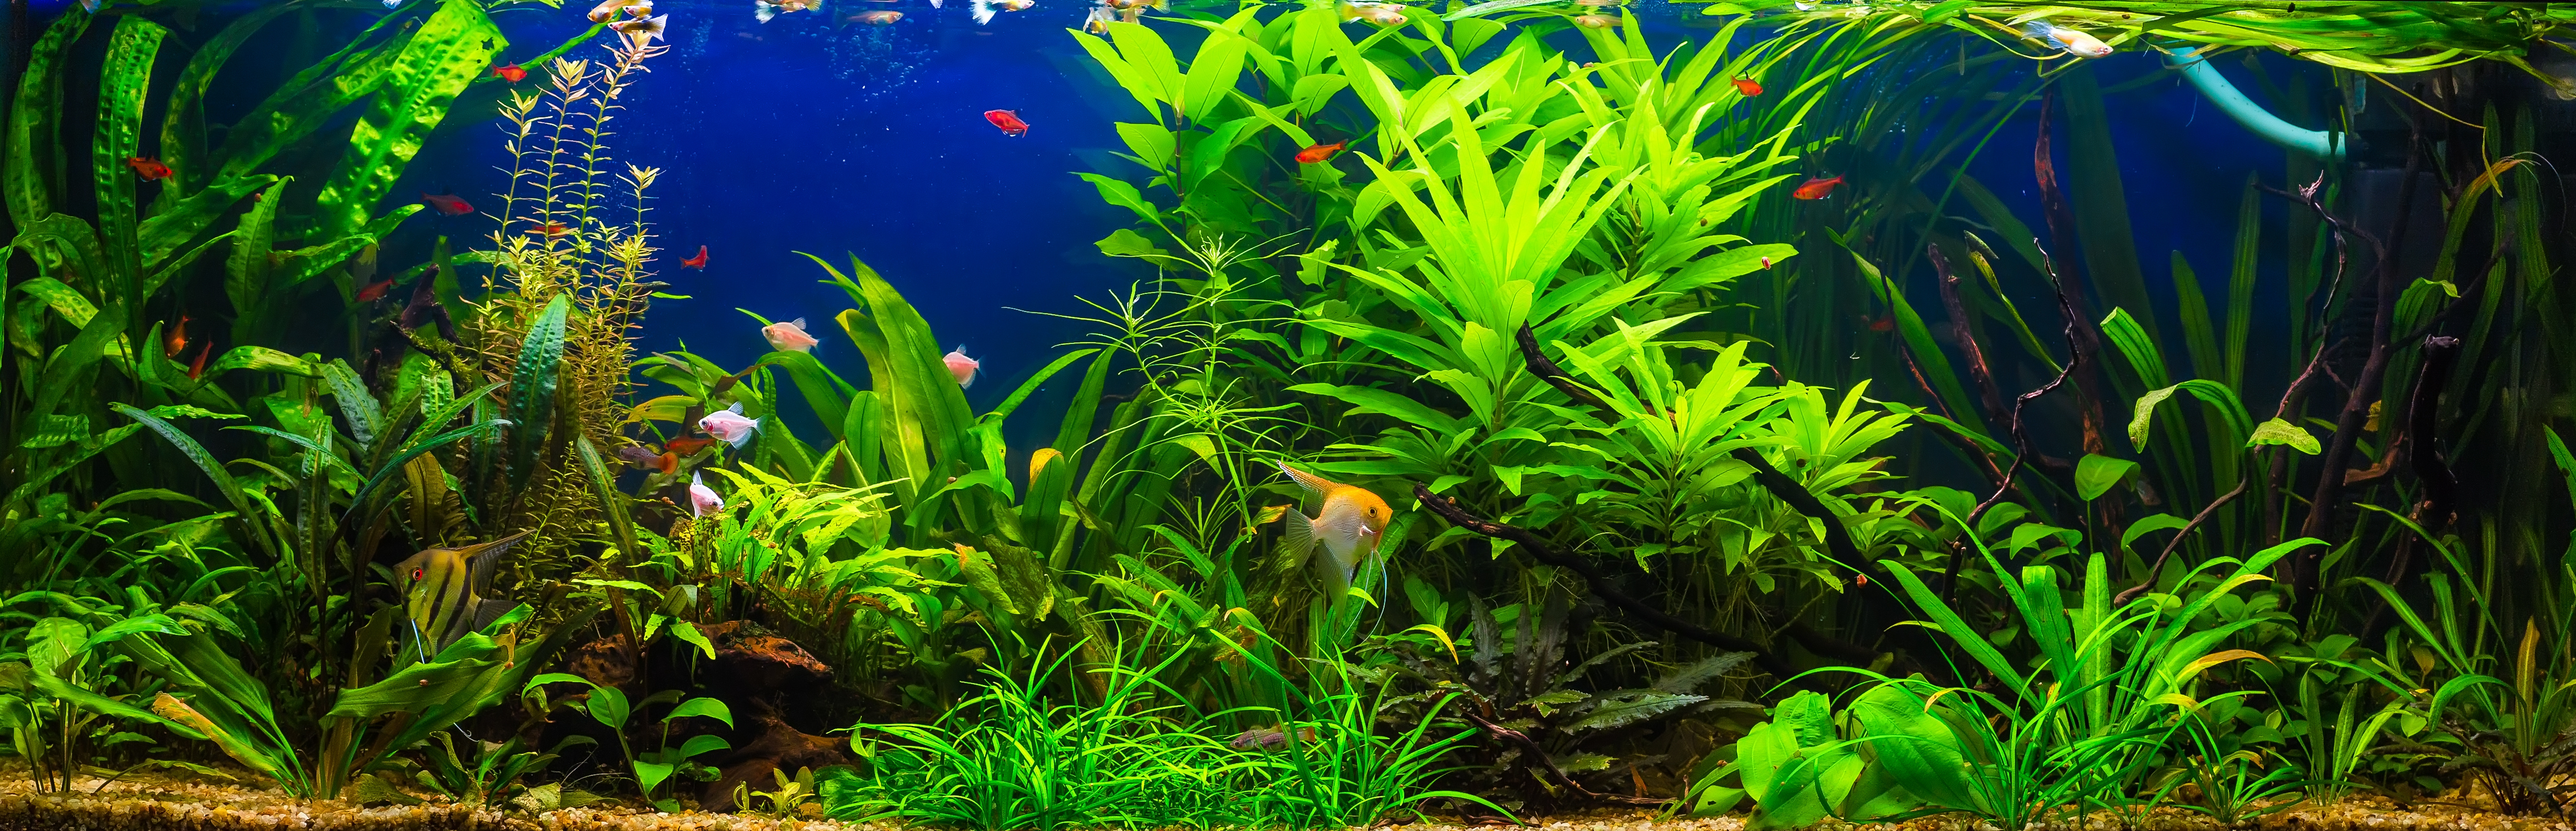 fish in freshwater aquarium with green beautiful planted tropical